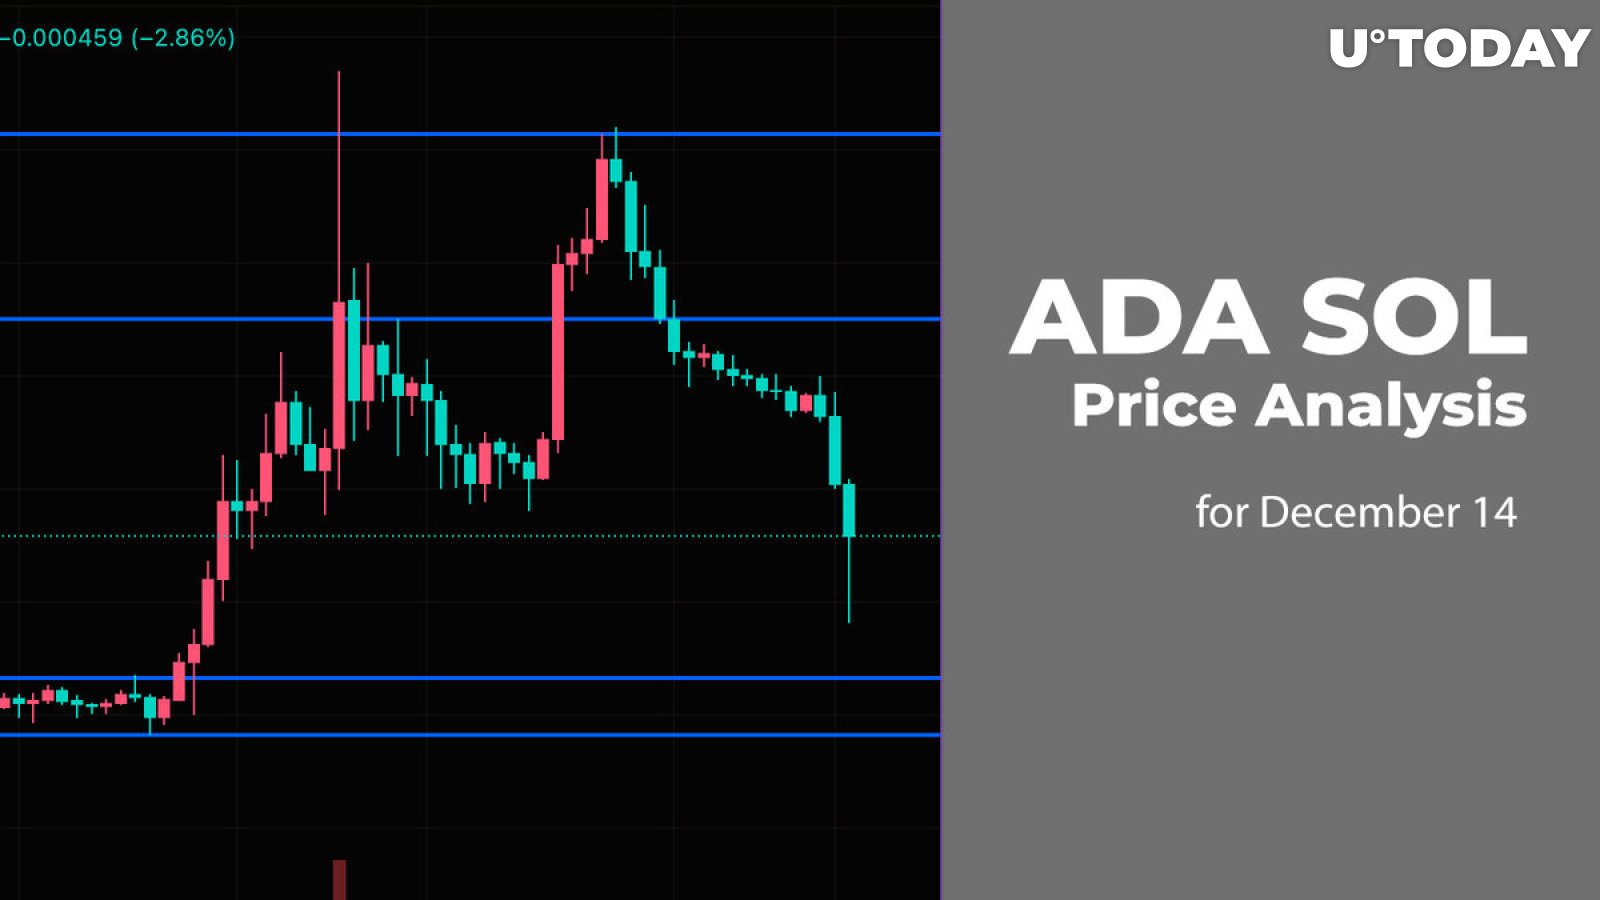 ADA and SOL Price Analysis for December 14